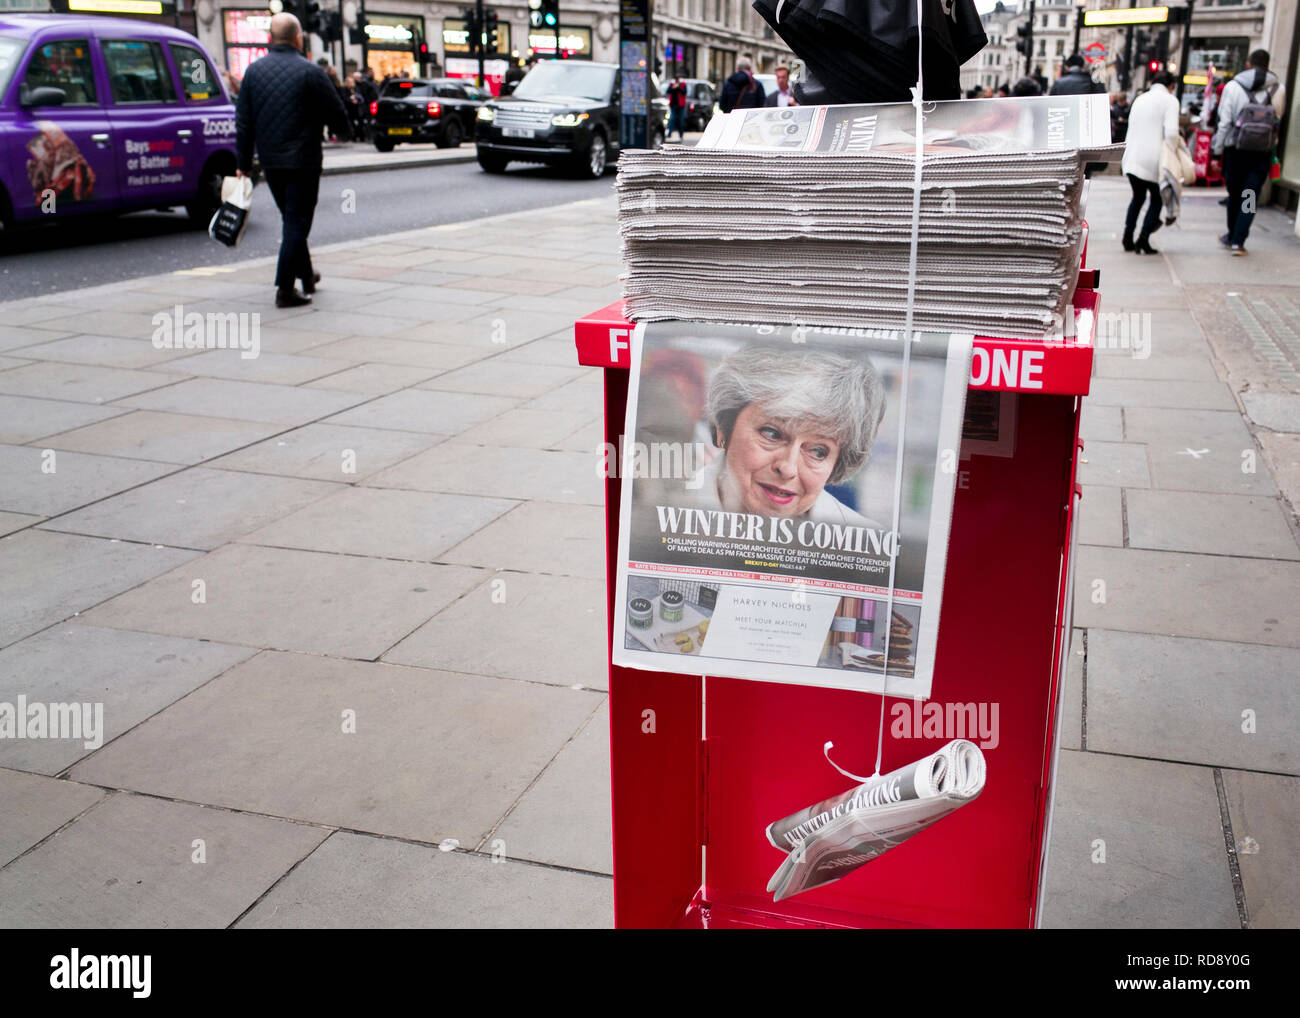 Theresa May,Evening standard newspaper headline, 'winters coming' Evening standard free newspaper dispensed on streets of London Stock Photo